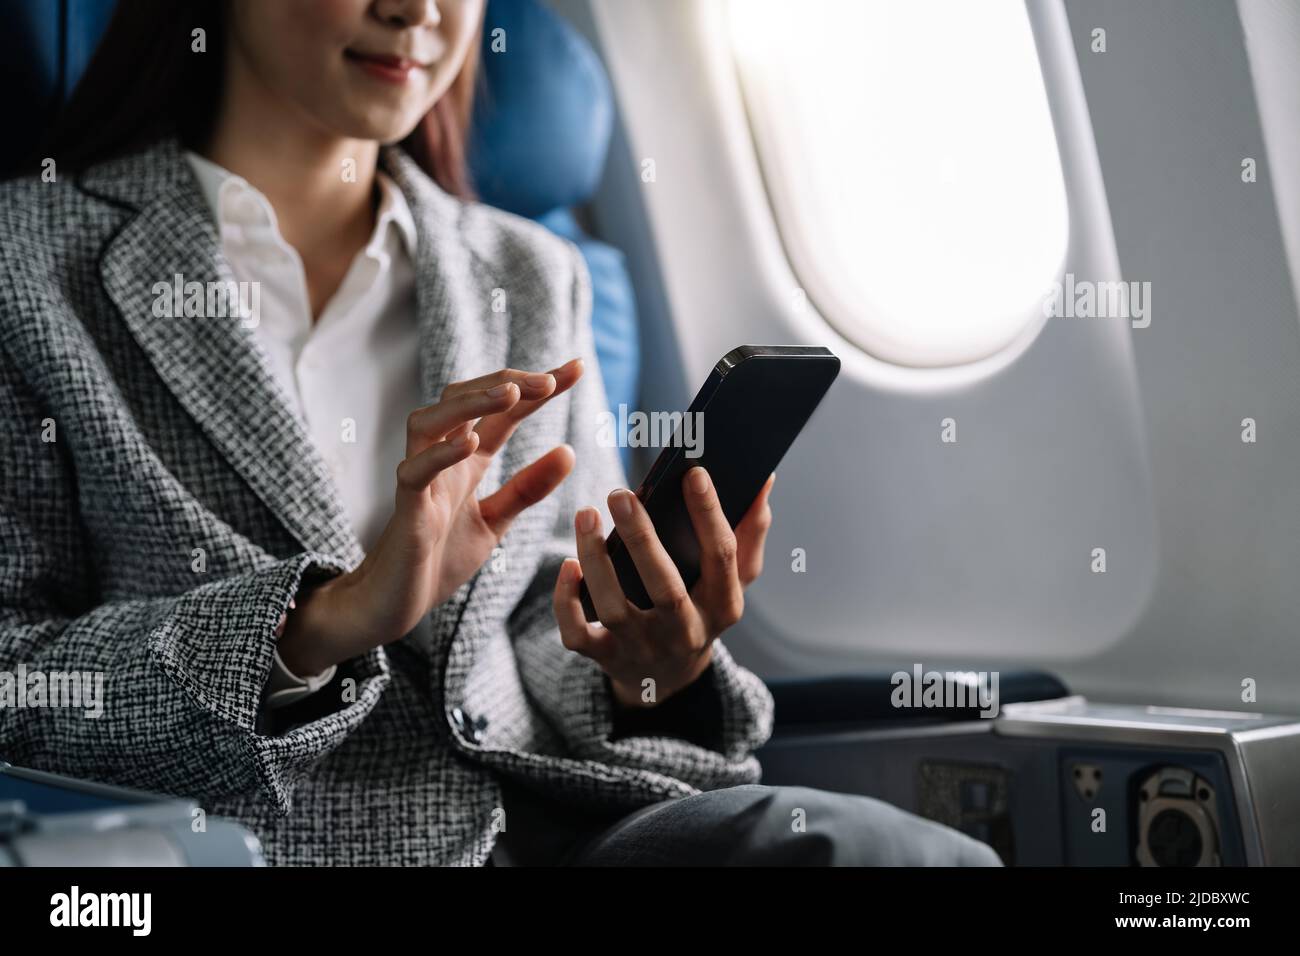 Travel and technology. Young asian woman in plane using smartphone while sitting in airplane seat Stock Photo